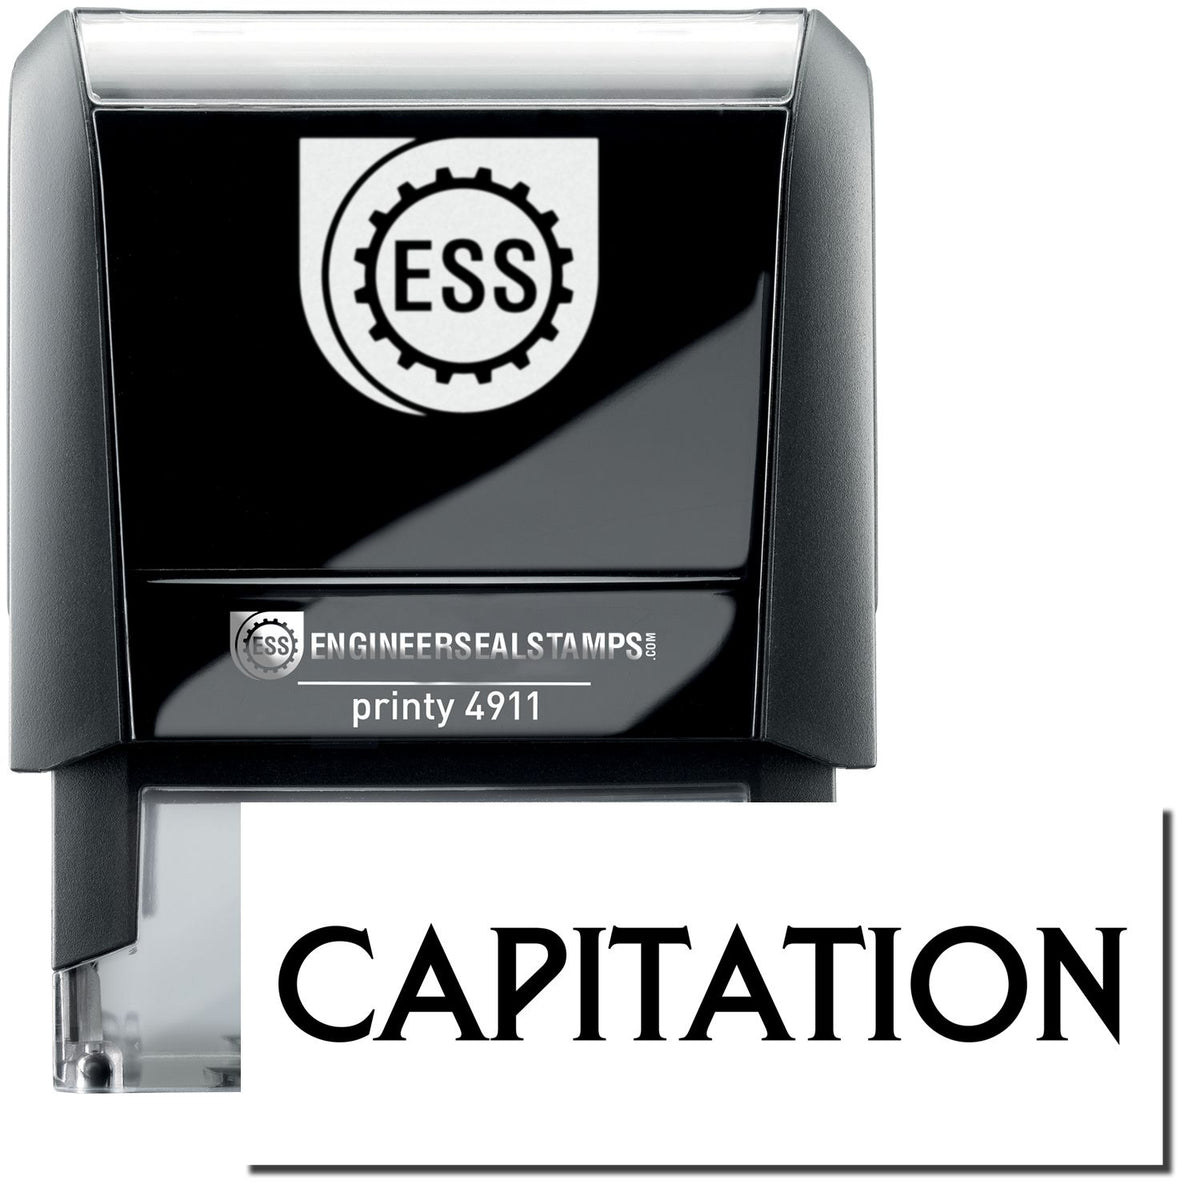 A self-inking stamp with a stamped image showing how the text &quot;CAPITATION&quot; is displayed after stamping.